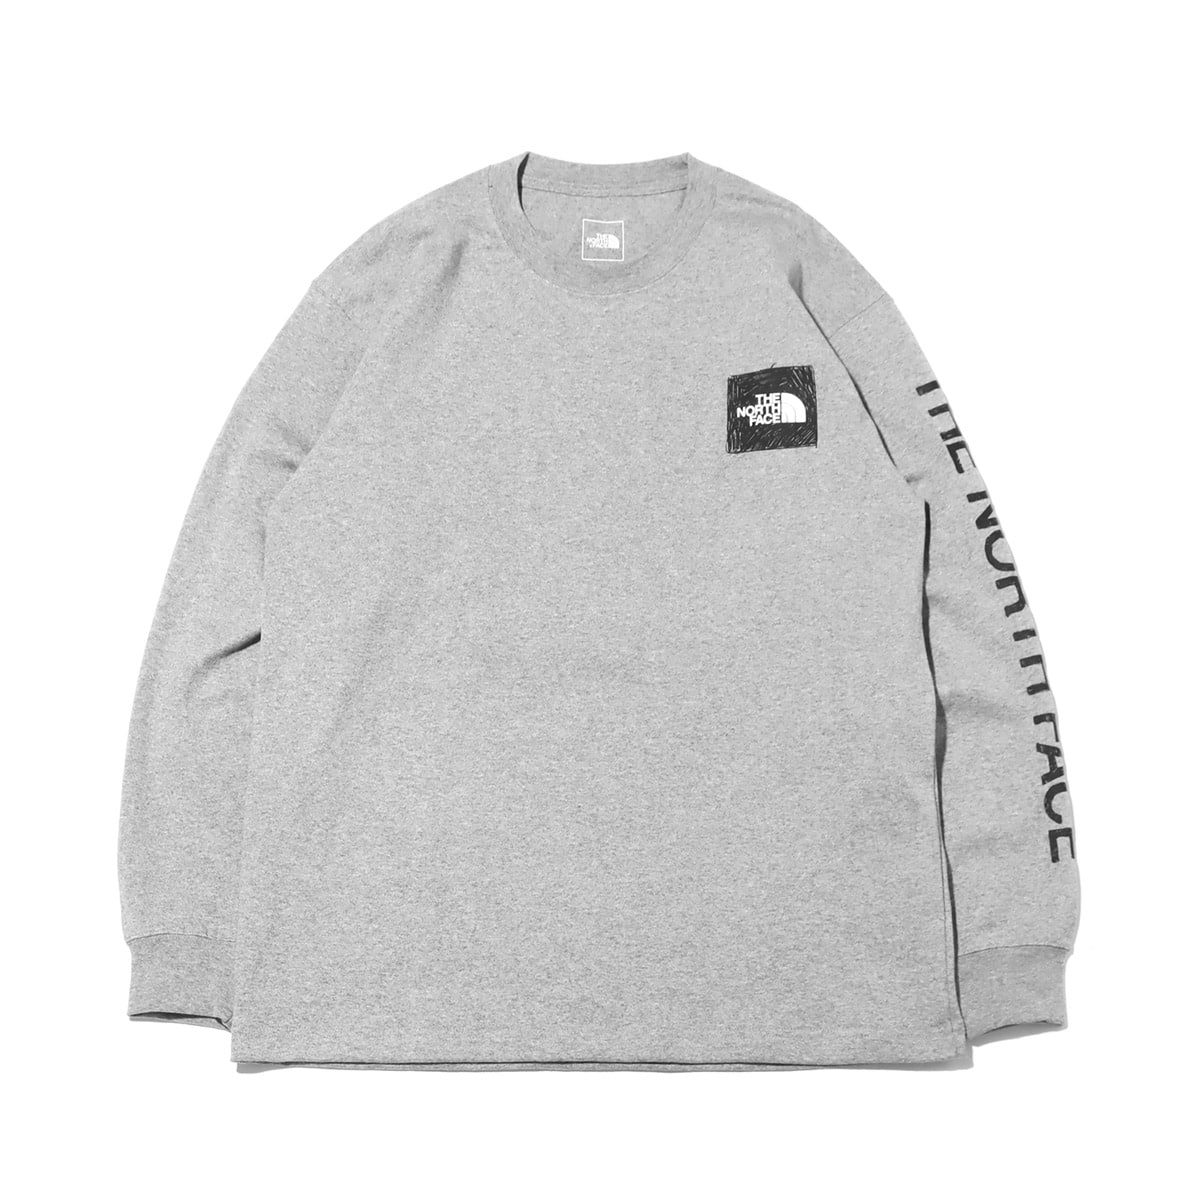 THE NORTH FACE L/S SLEEVE GRAPHIC TEE ミックスグレー 23SS-I